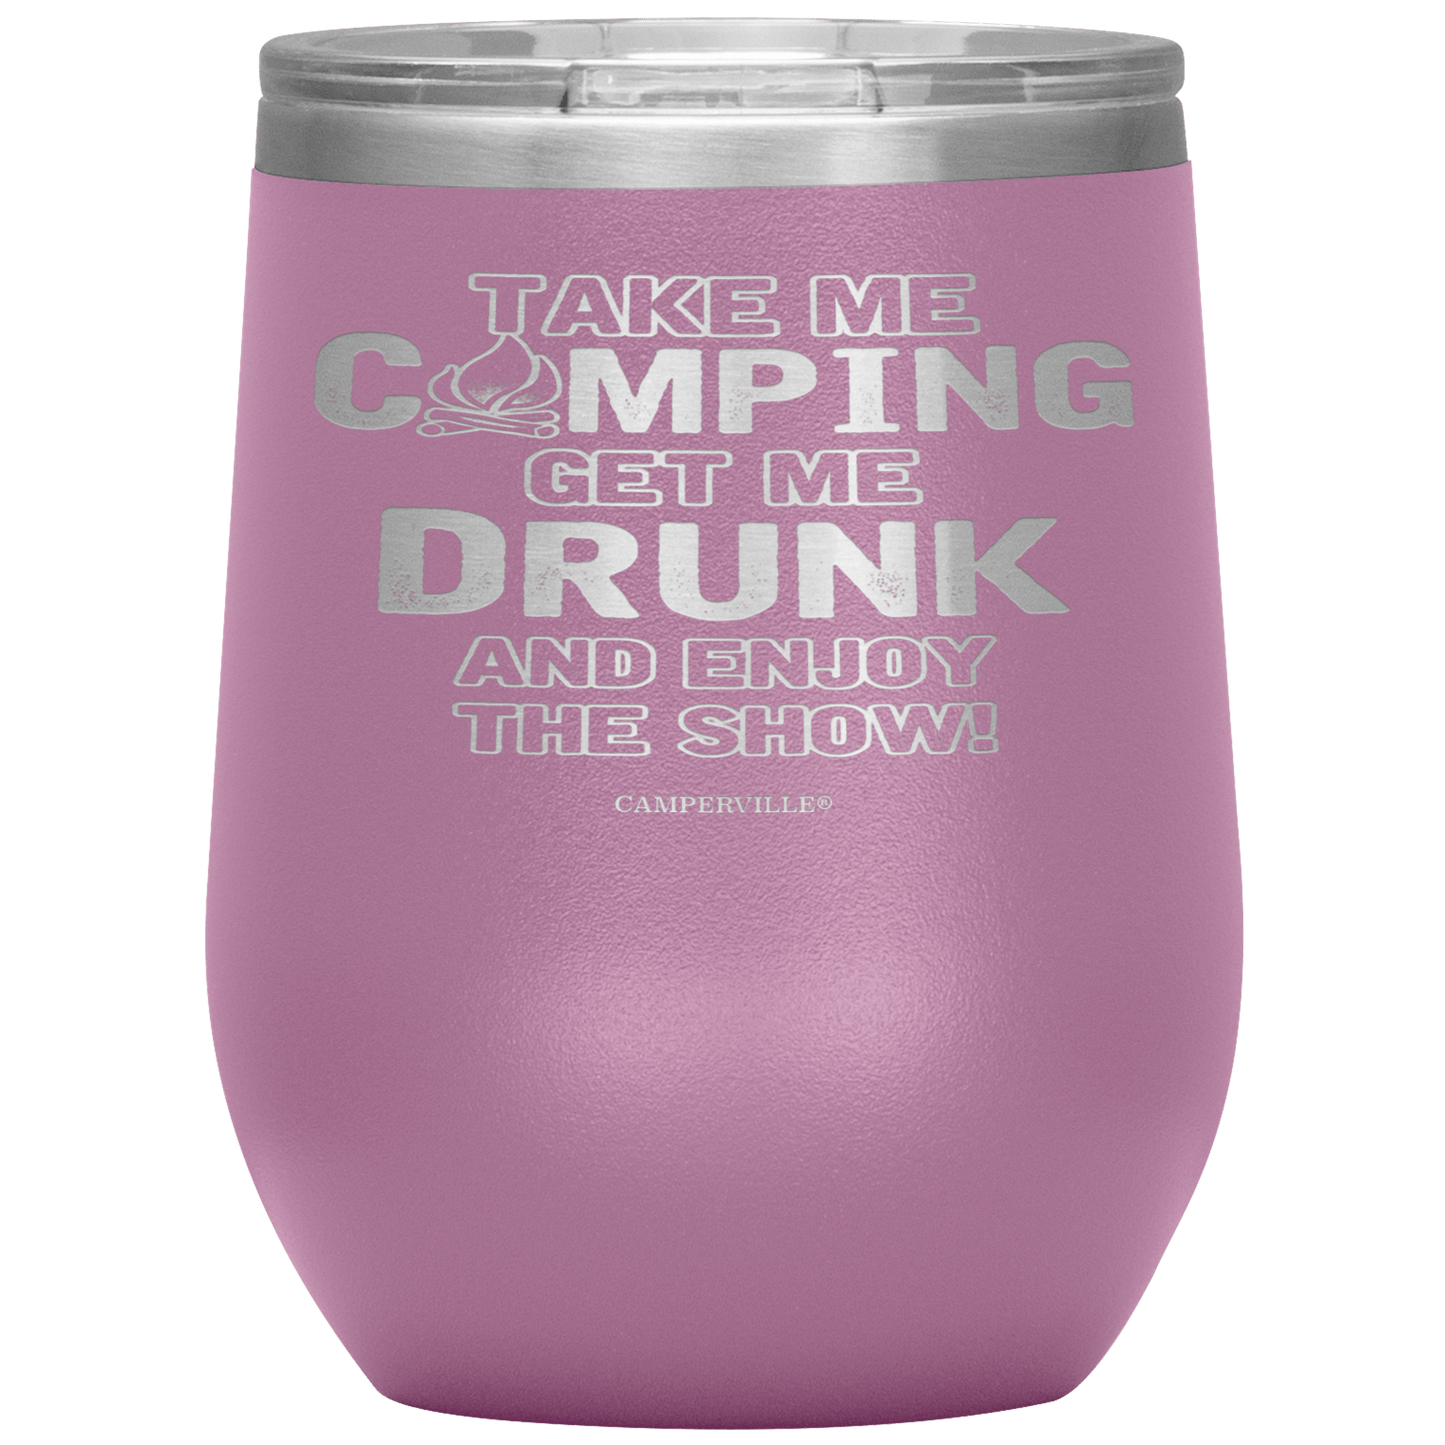 Funny "Take Me Camping, Get Me Drunk and Enjoy The Show" Wine Cup